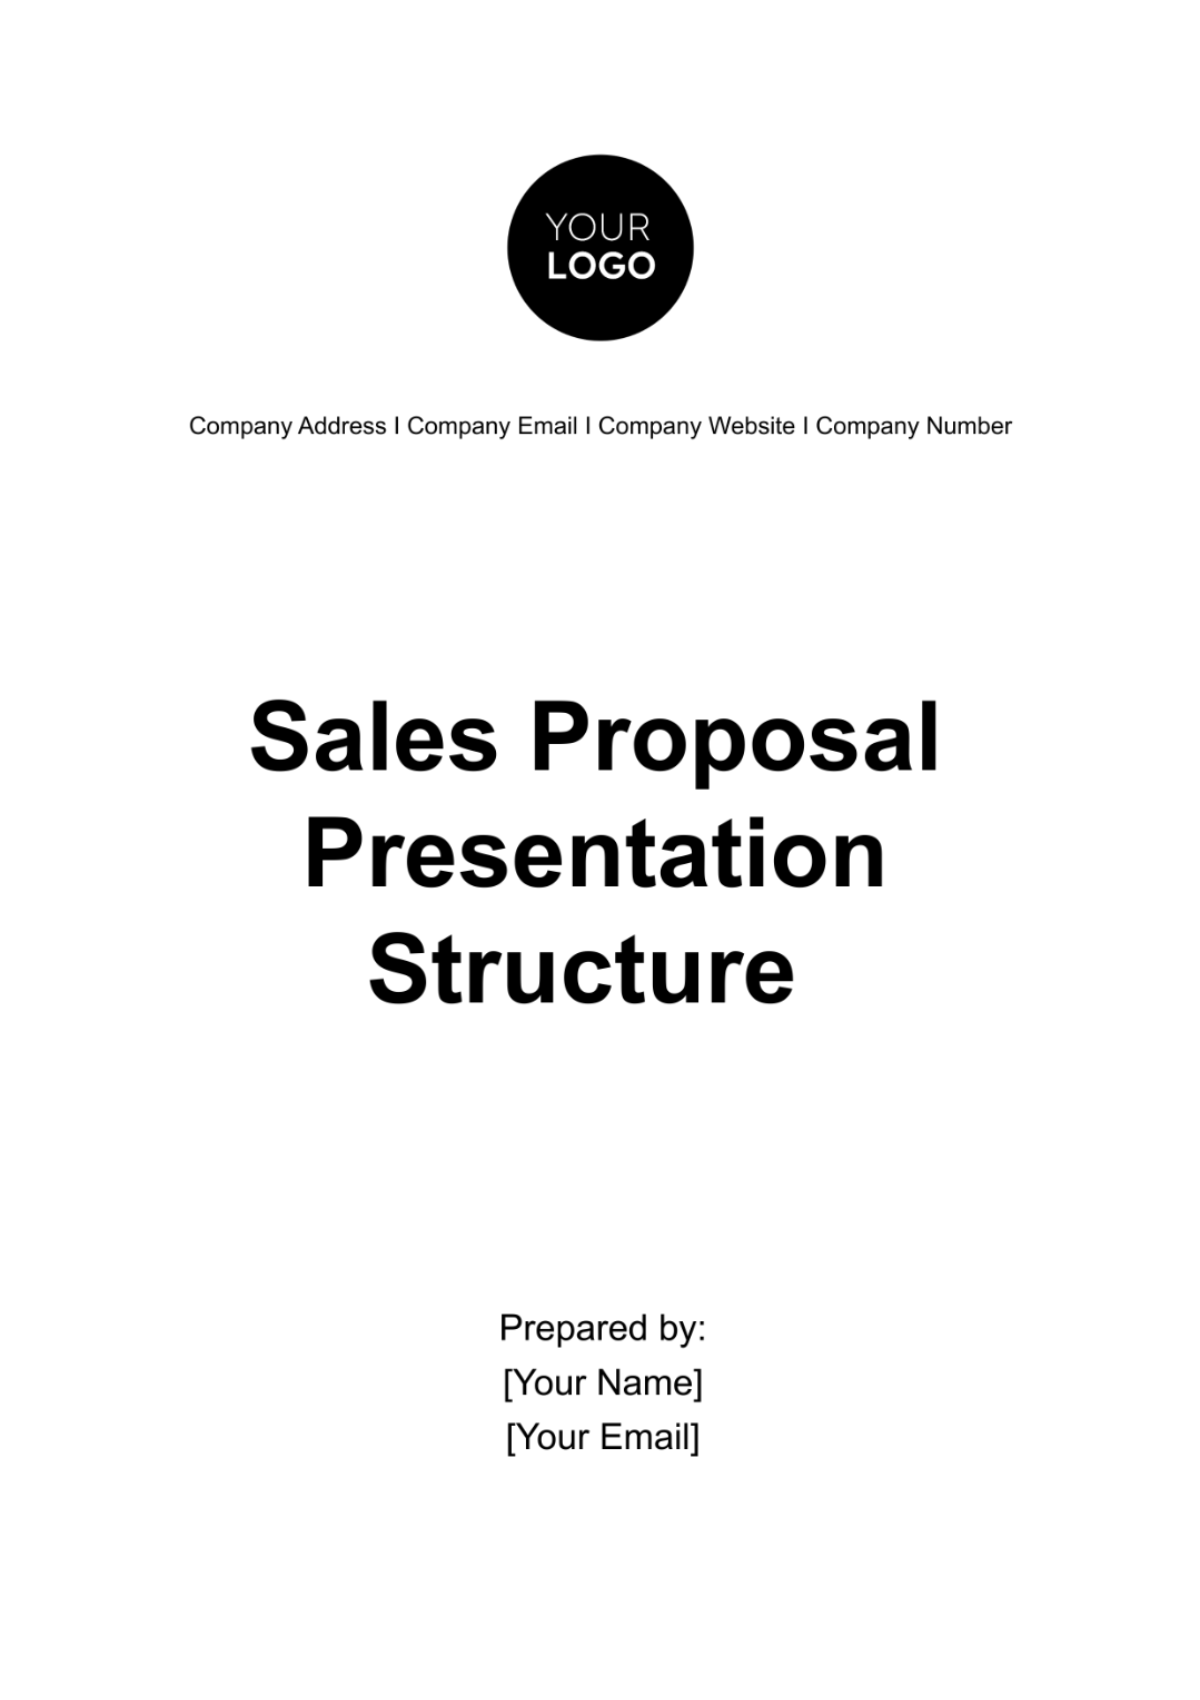 Free Sales Proposal Presentation Structure Template